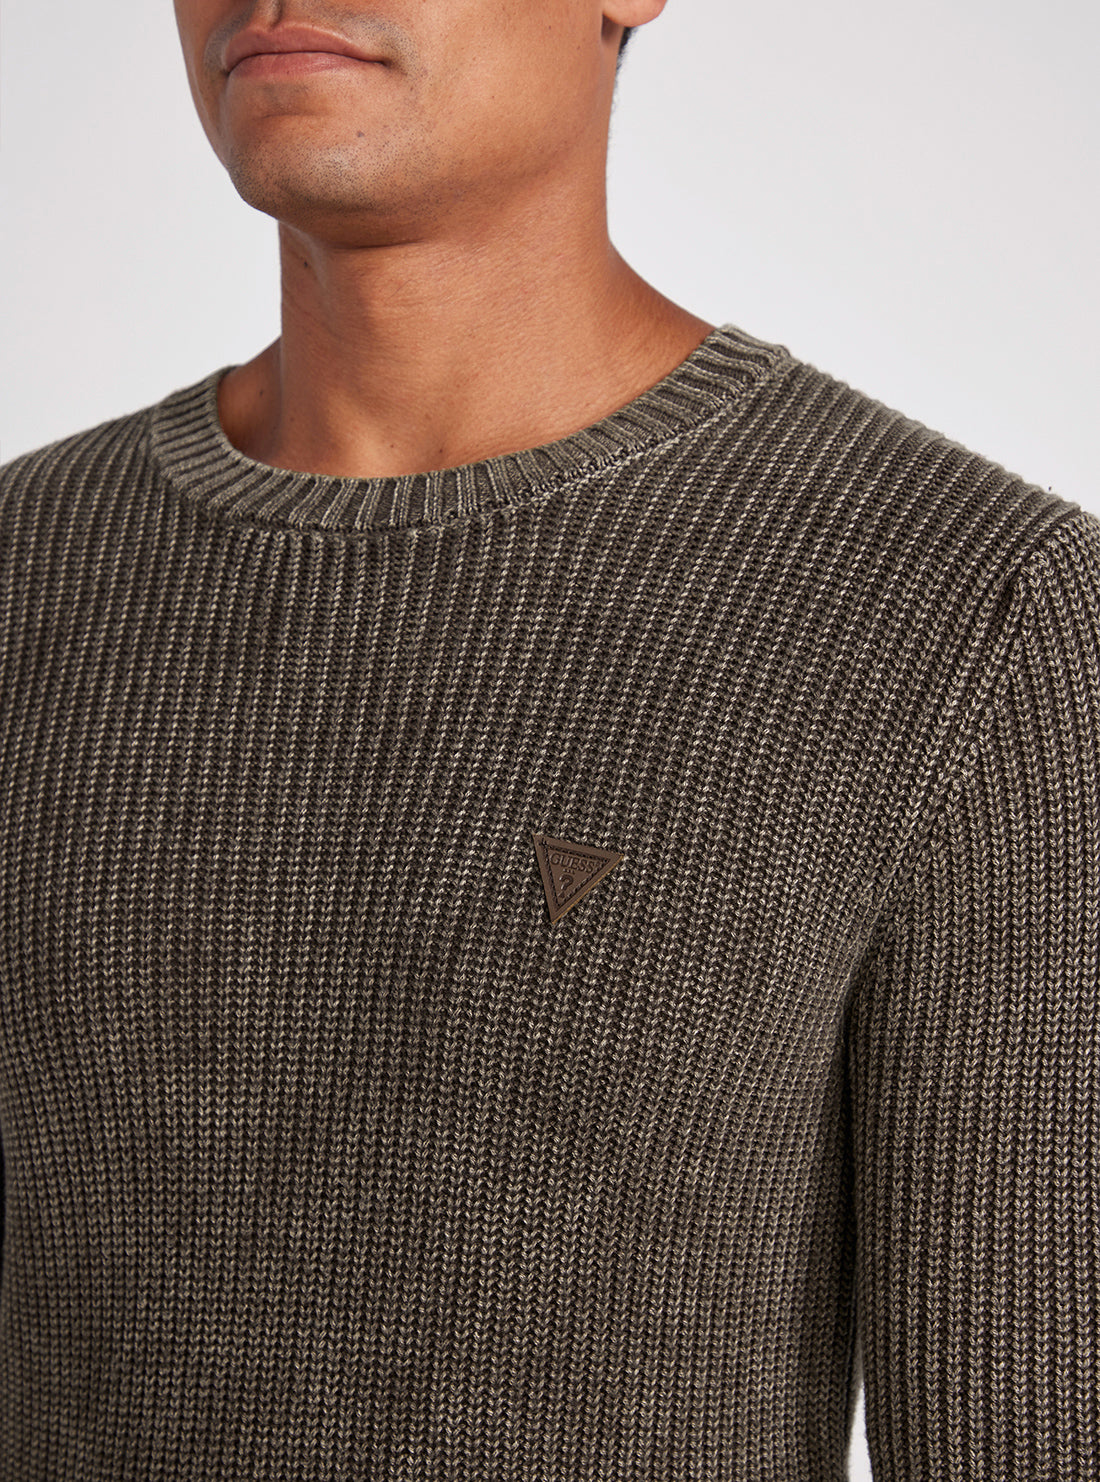 Espresso Brown Angus Knit Jumper | GUESS Men's Apparel | detail view